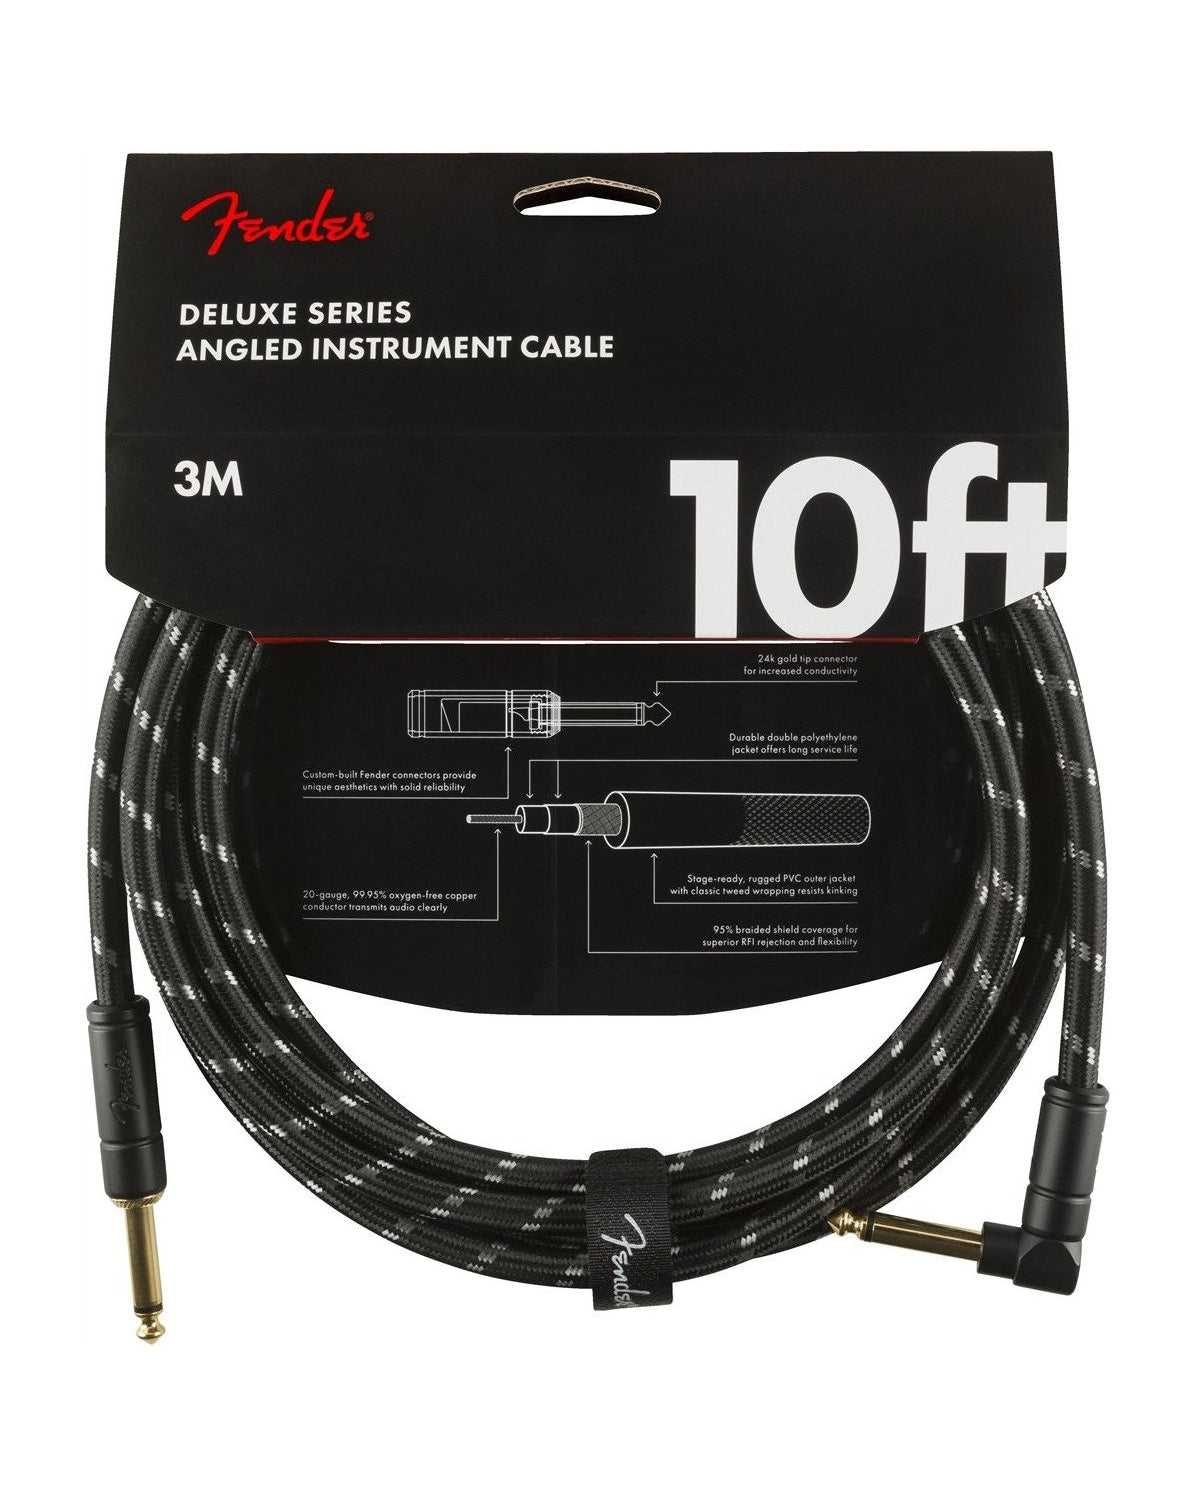 Front of Fender Deluxe Series Instrument Cable in packaging 